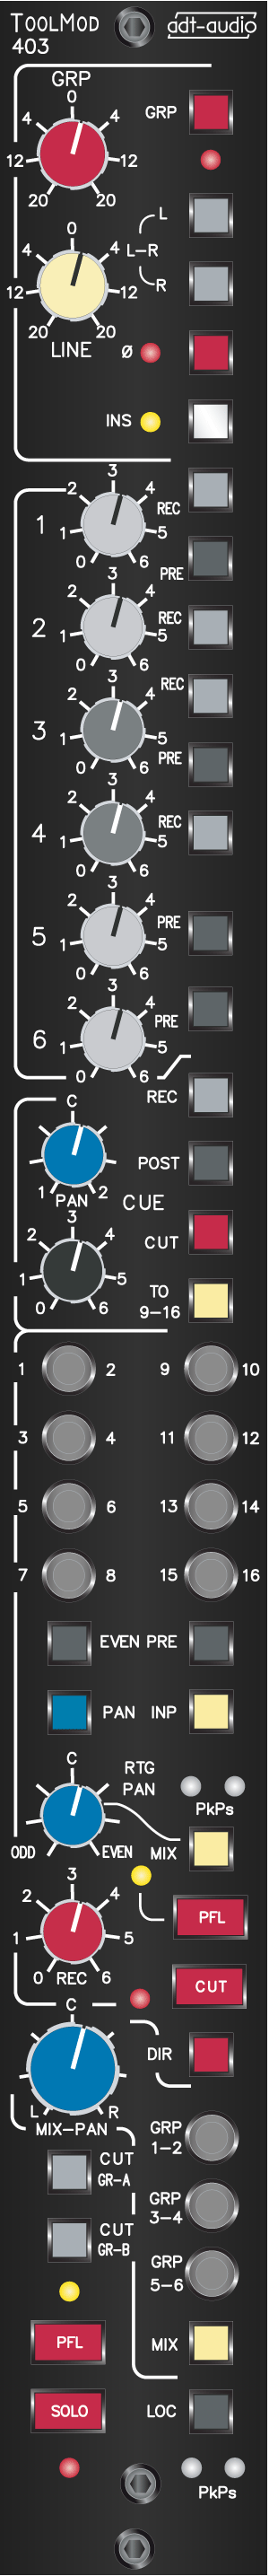 Stereo Input and Group Module Face-Plate